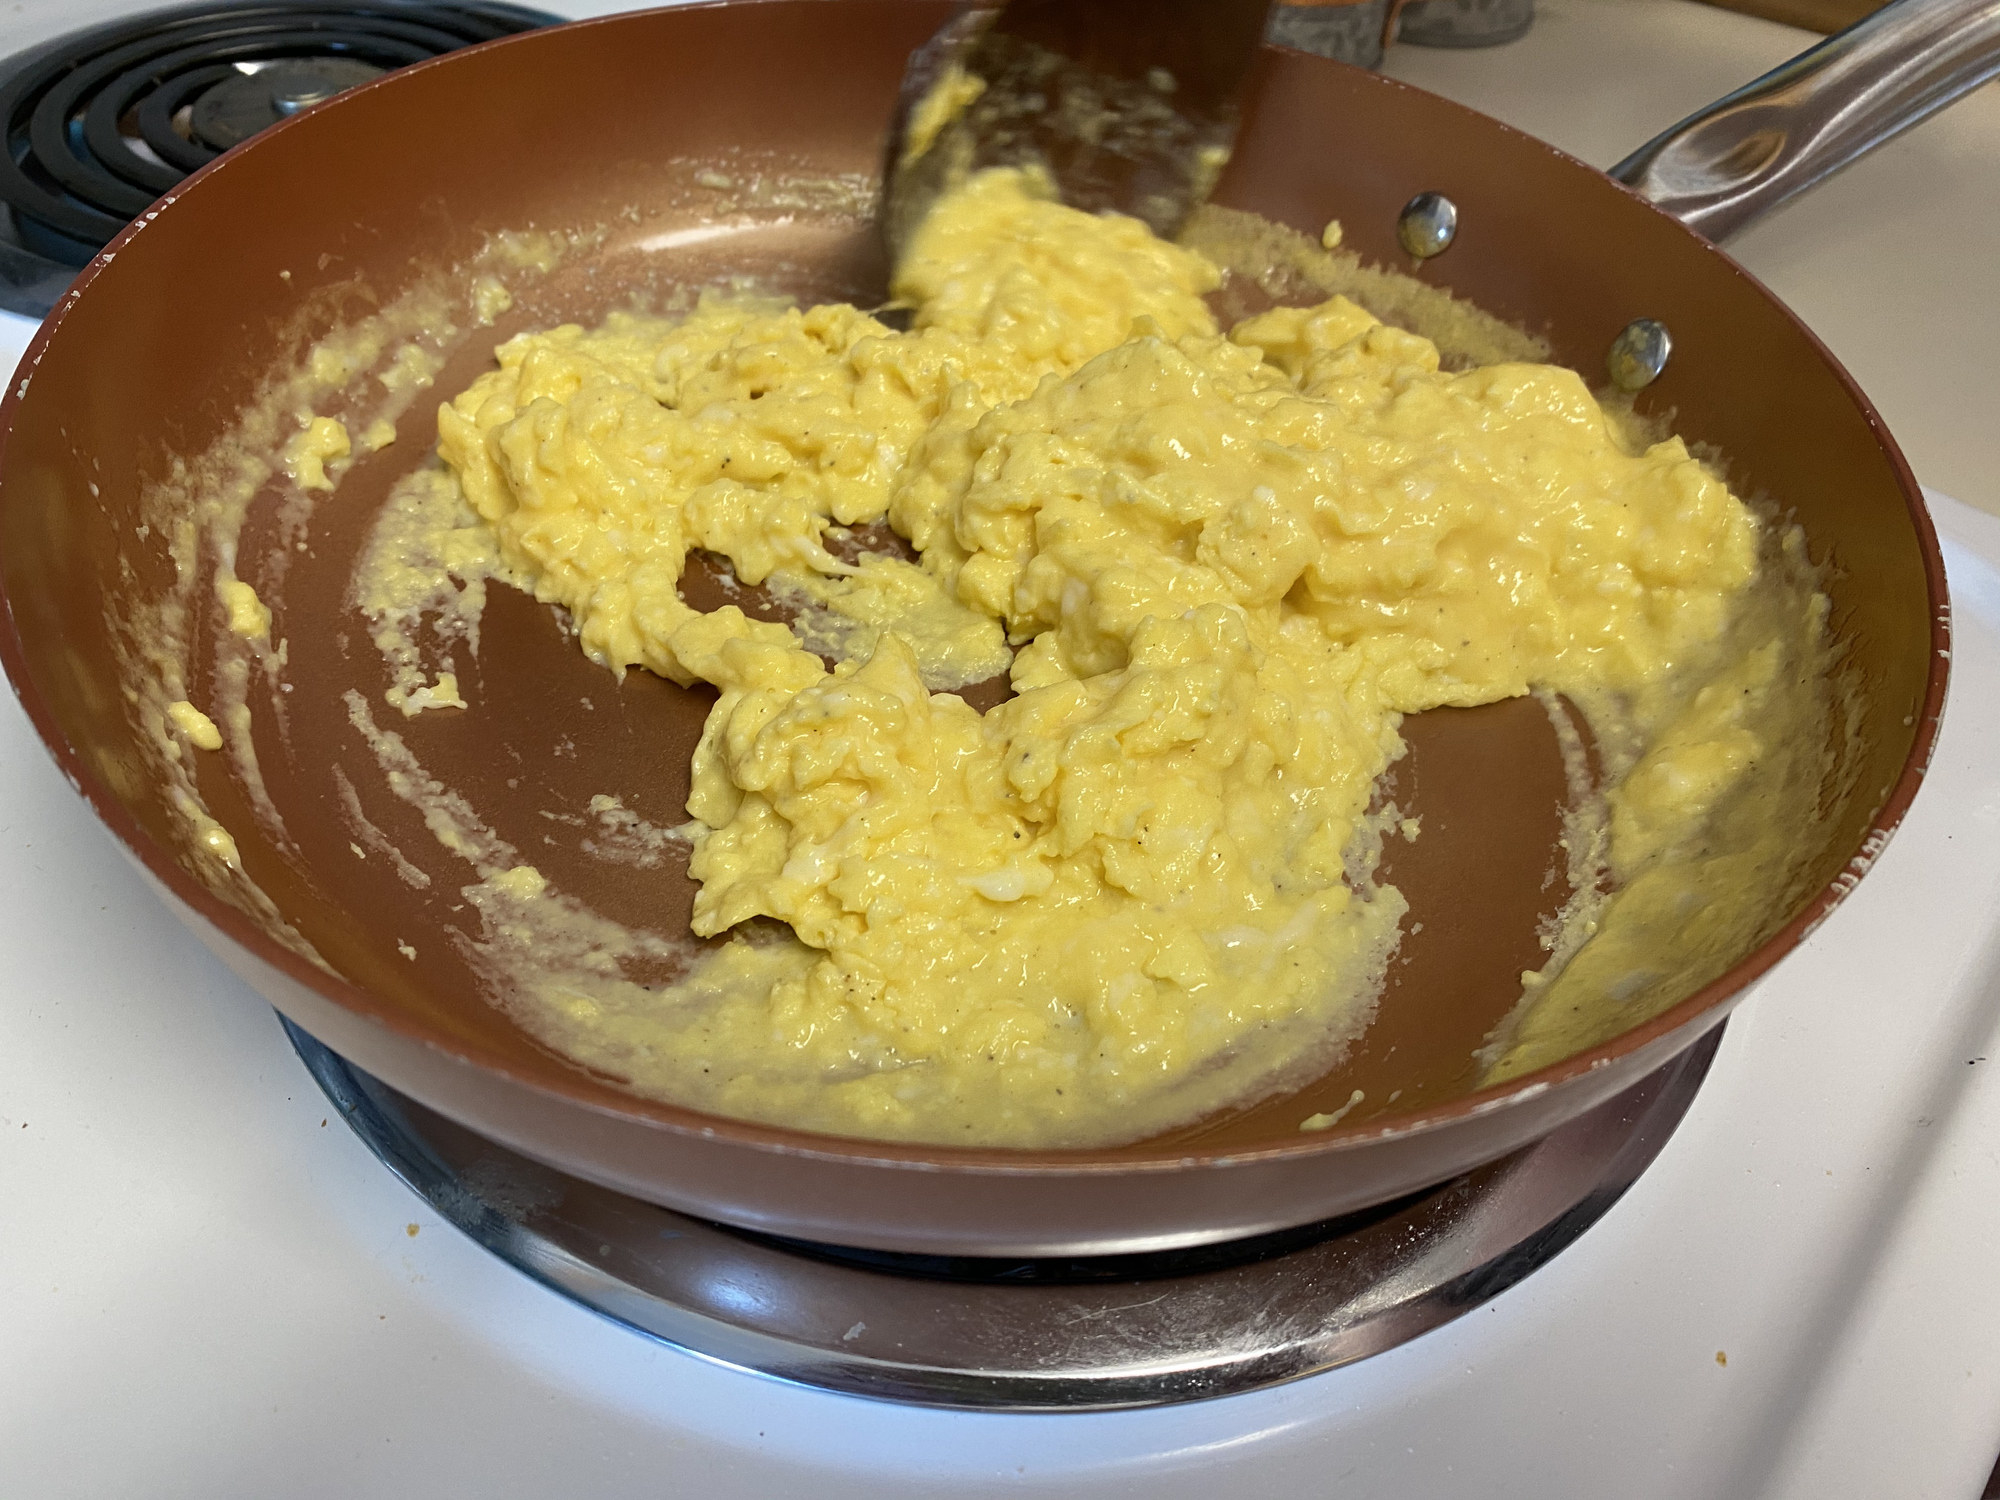 Mixing scrambled eggs on the stovetop